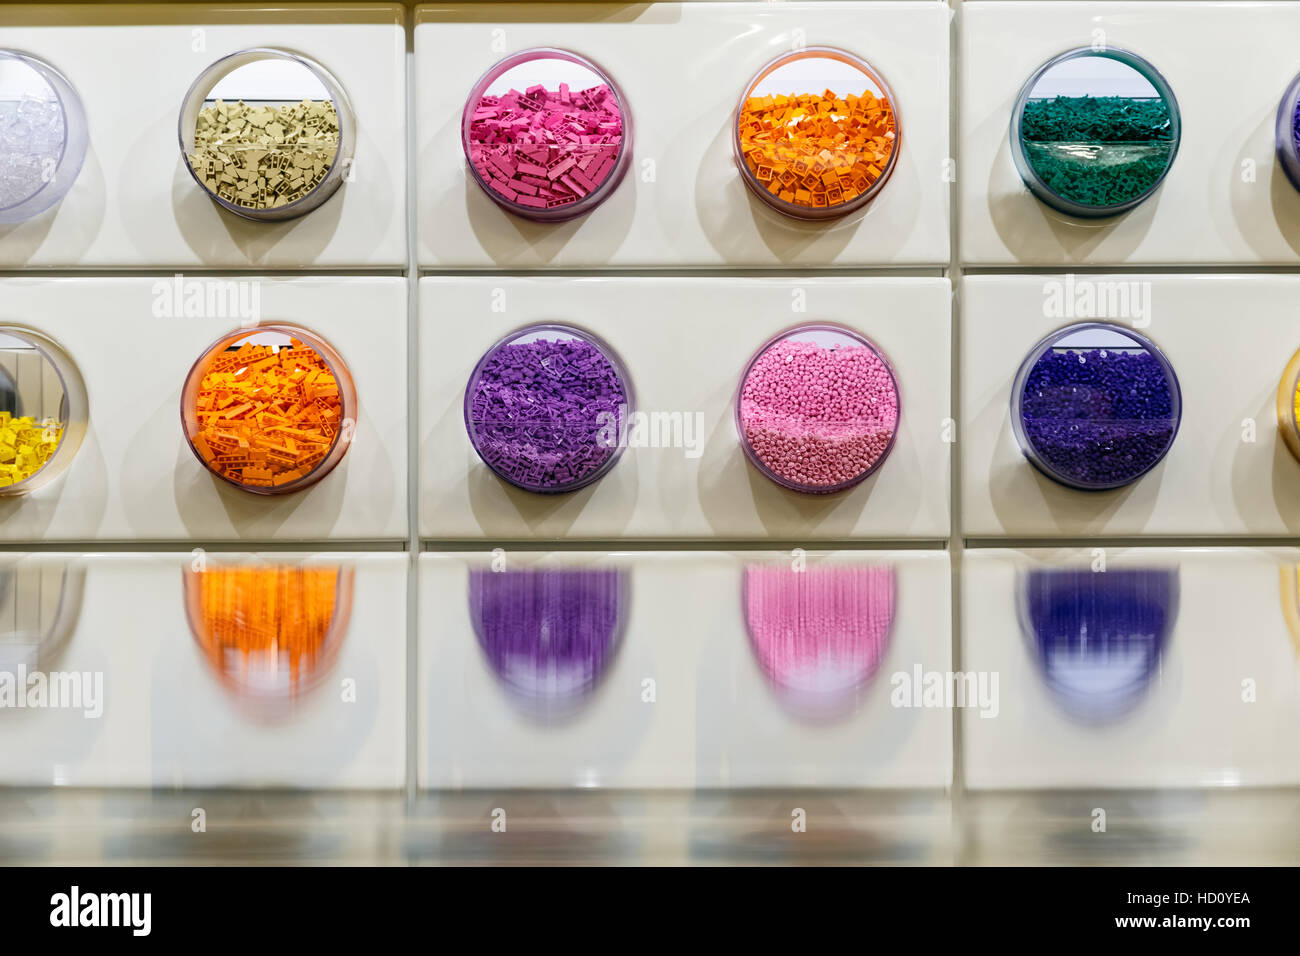 London, UK - November 22, 2016 - Colourful LEGO bricks displayed in the world's largest LEGO store, newly opened in Leicester Square Stock Photo